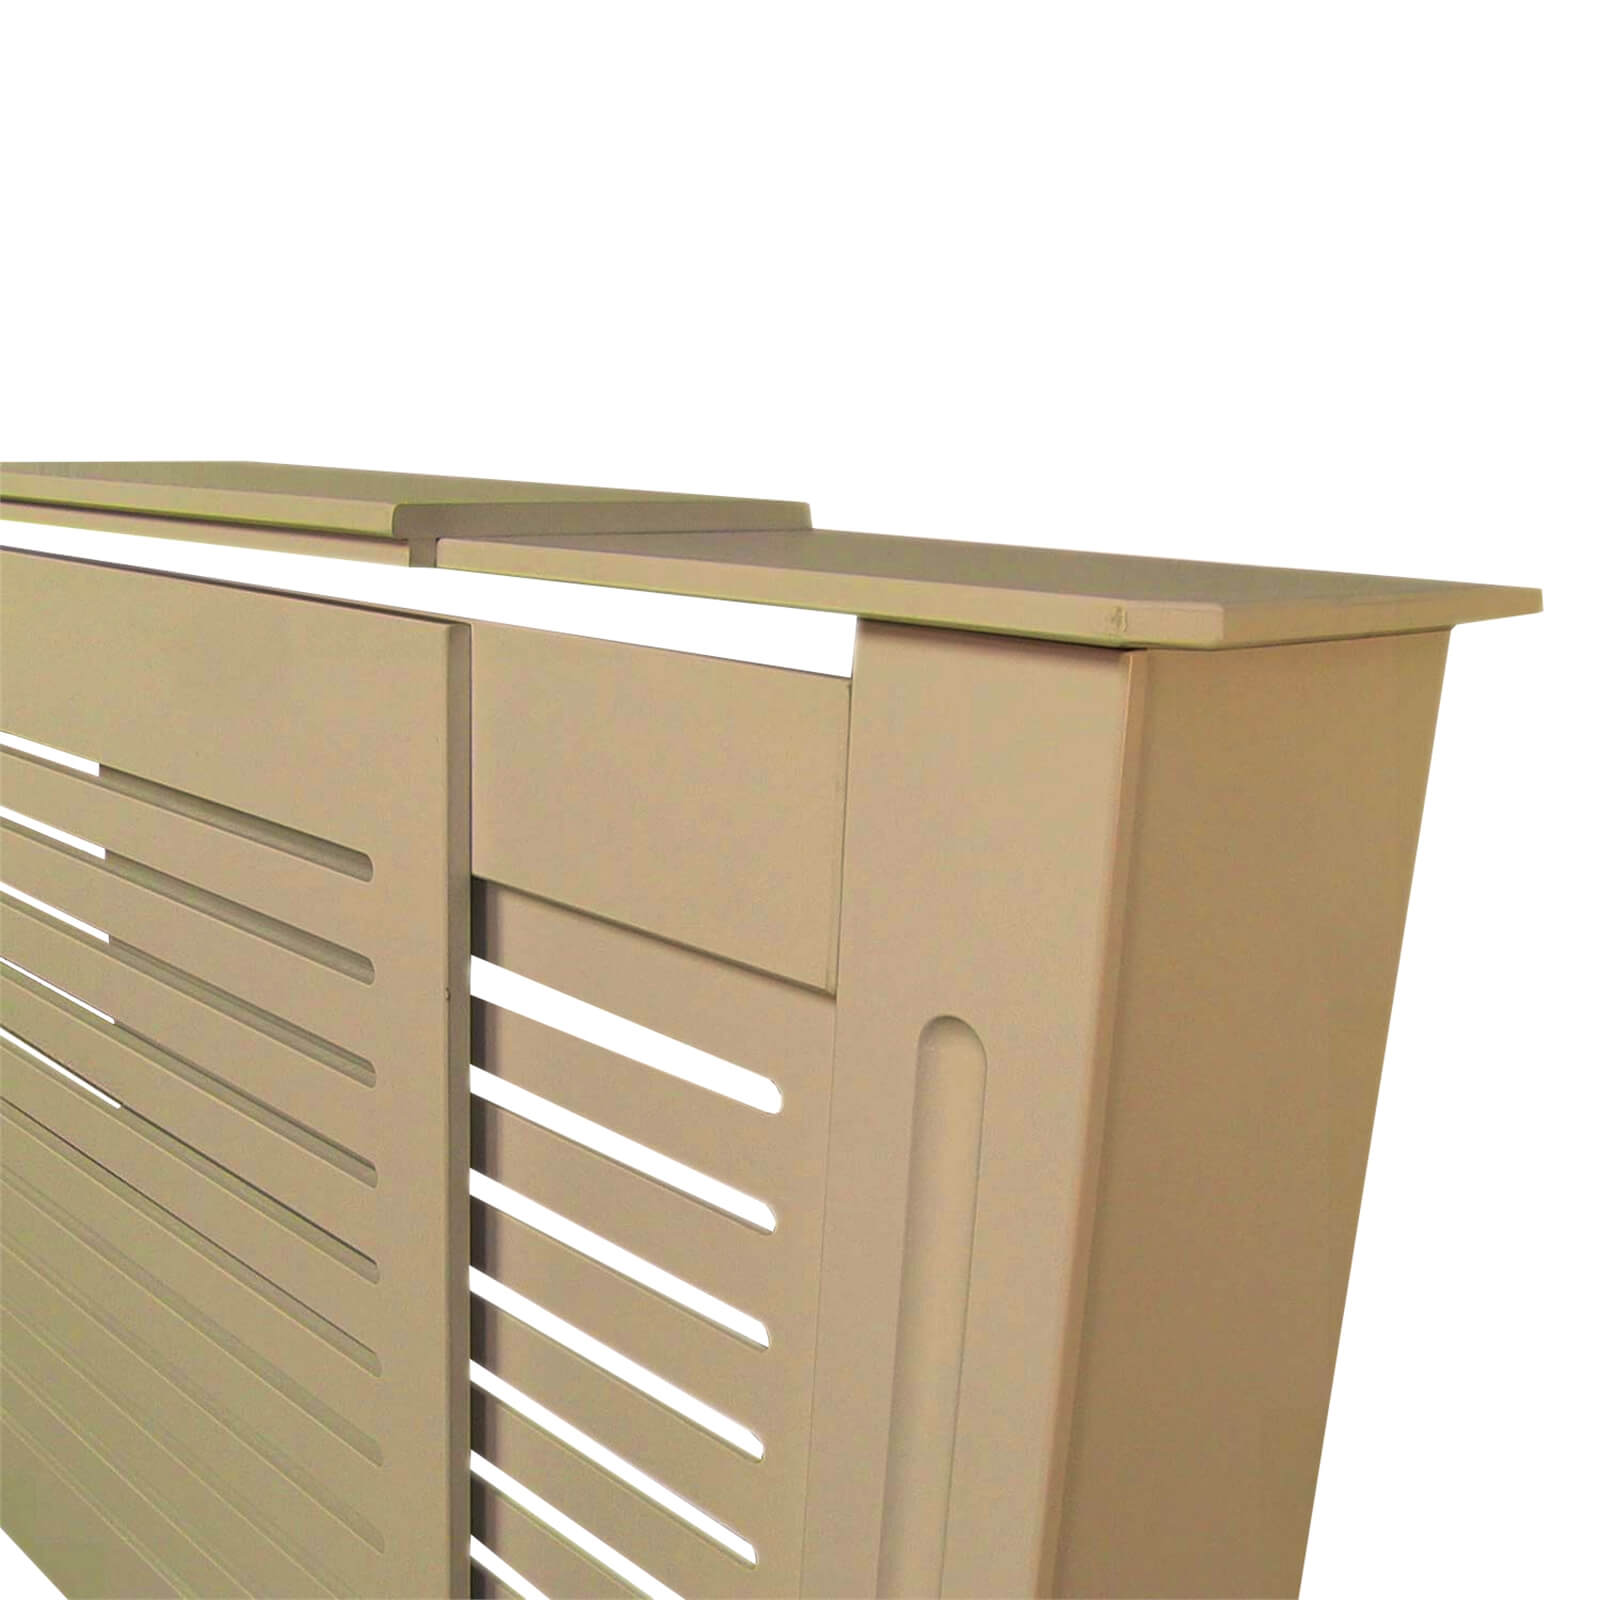 Radiator Cover with Horizontal Slatted Design in Unpainted - Adjustable